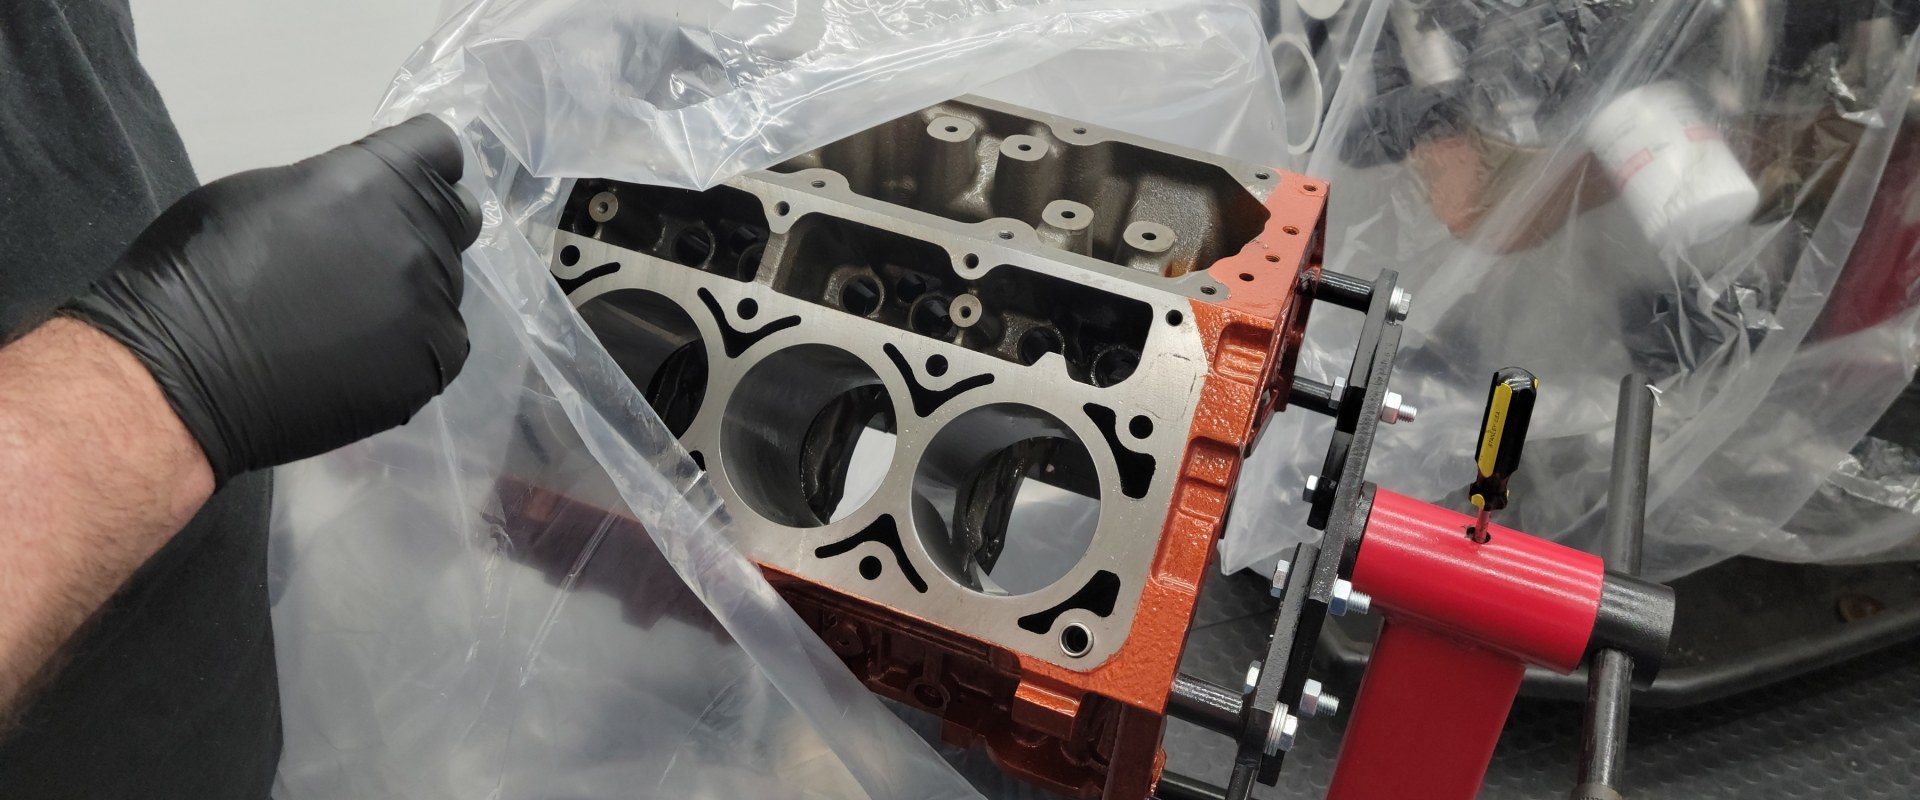 Protecting From Moisture And Dust: Tips For Maintaining And Using Replica Engines